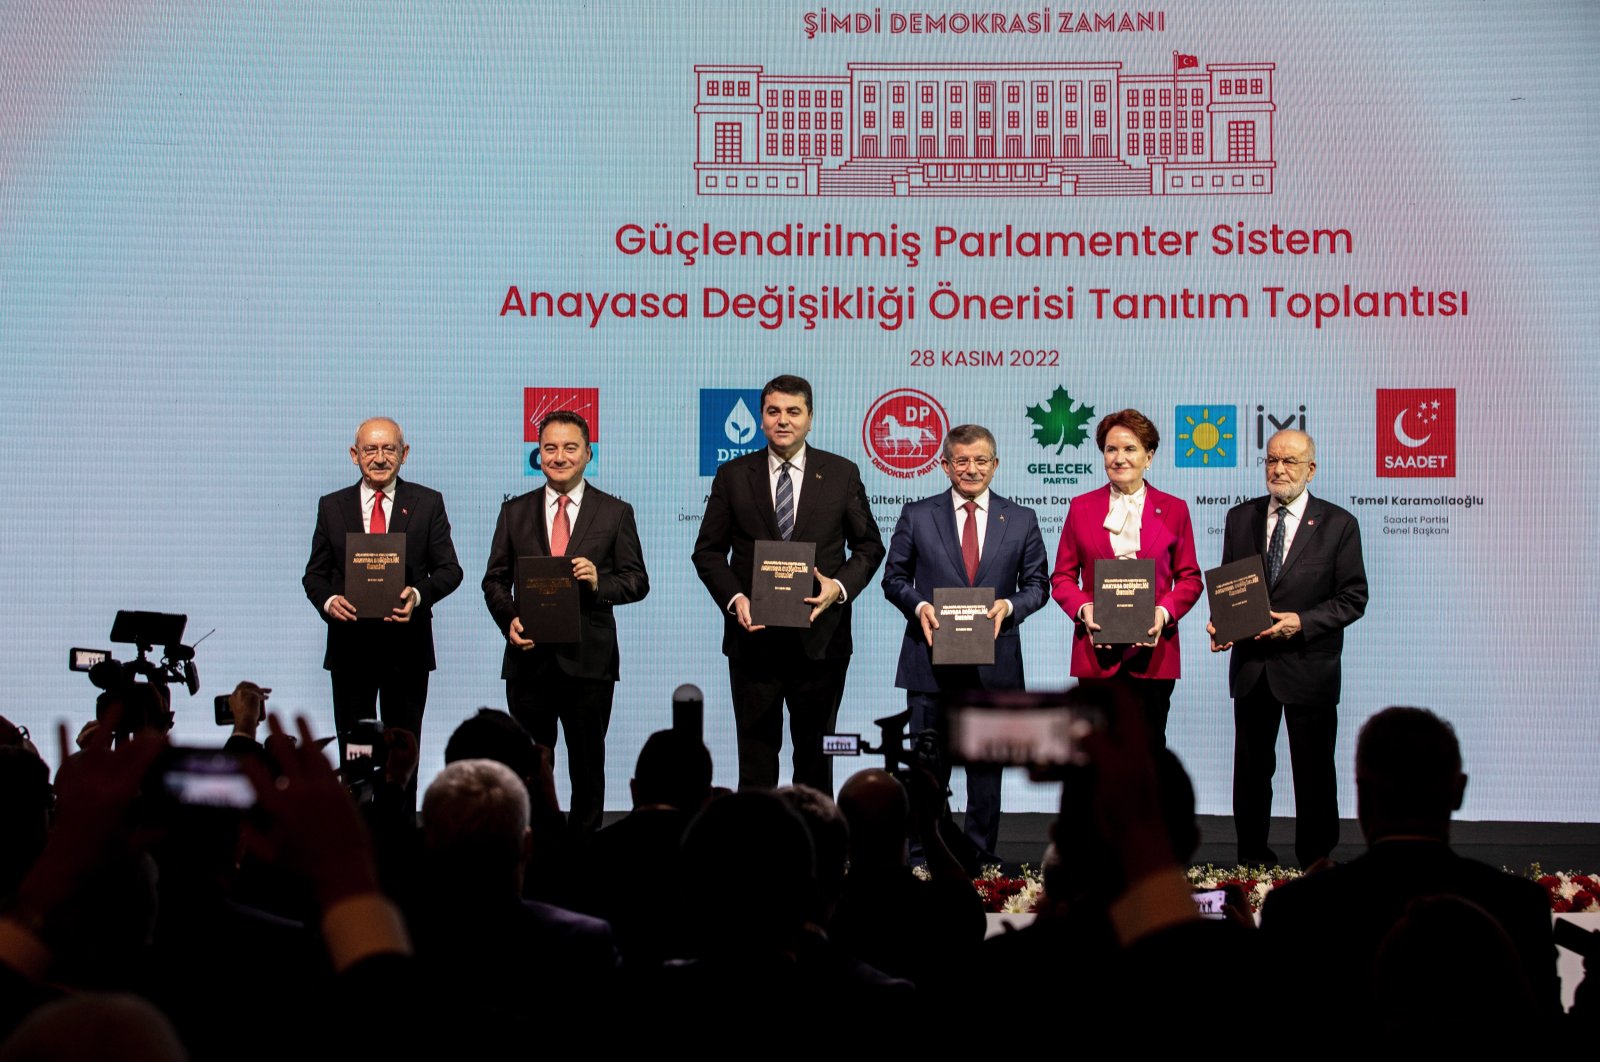 The chairpersons of the political parties in the opposition bloc – known as the “table for six” – pose as they take part in the Introduction Meeting of the Strengthened Parliamentary System Constitutional Amendment Proposal. (Getty Images Photo)